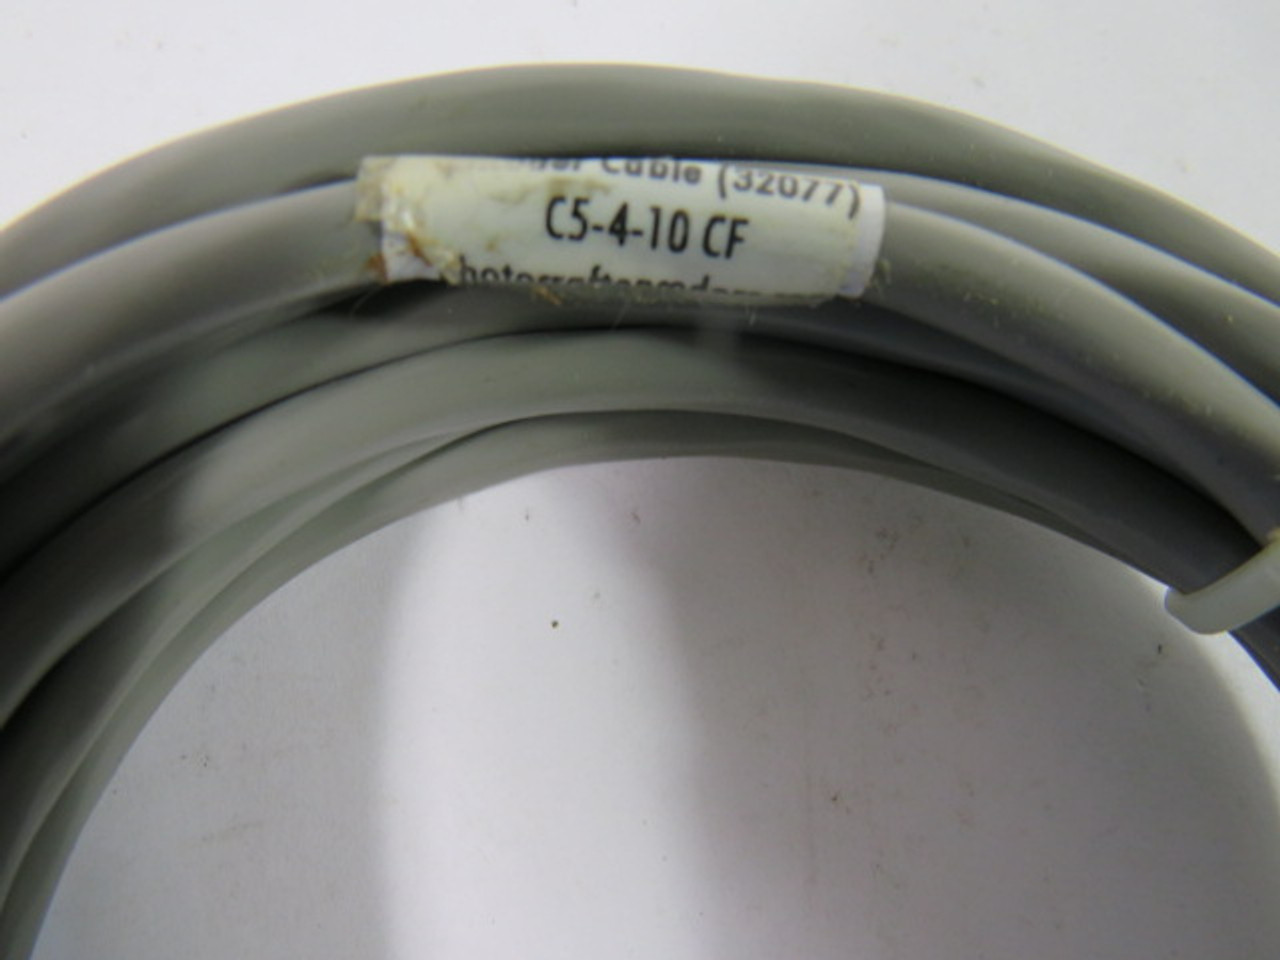 PhotoCraft C5-4-10 CF Encoder Cable 5Pin 10' USED